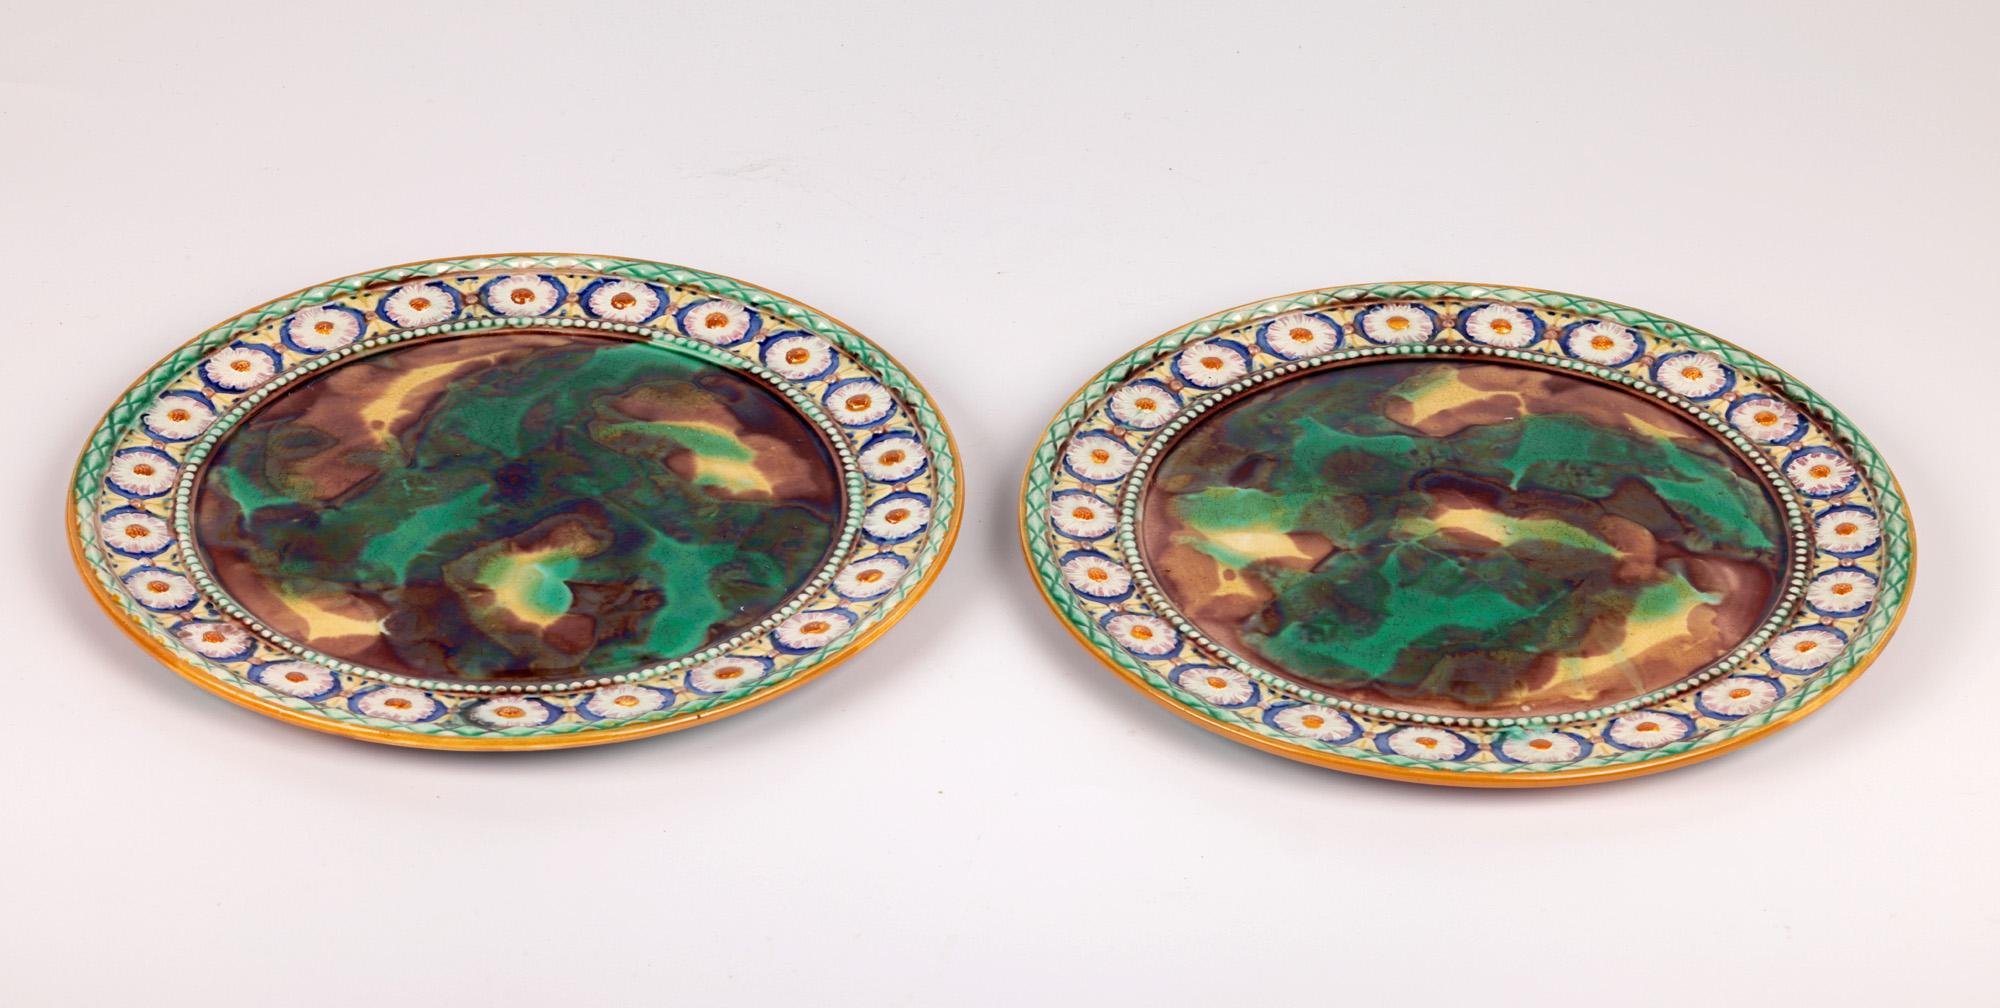 Wedgwood Pair Floral Rimmed Majolica Pottery Plates In Good Condition For Sale In Bishop's Stortford, Hertfordshire